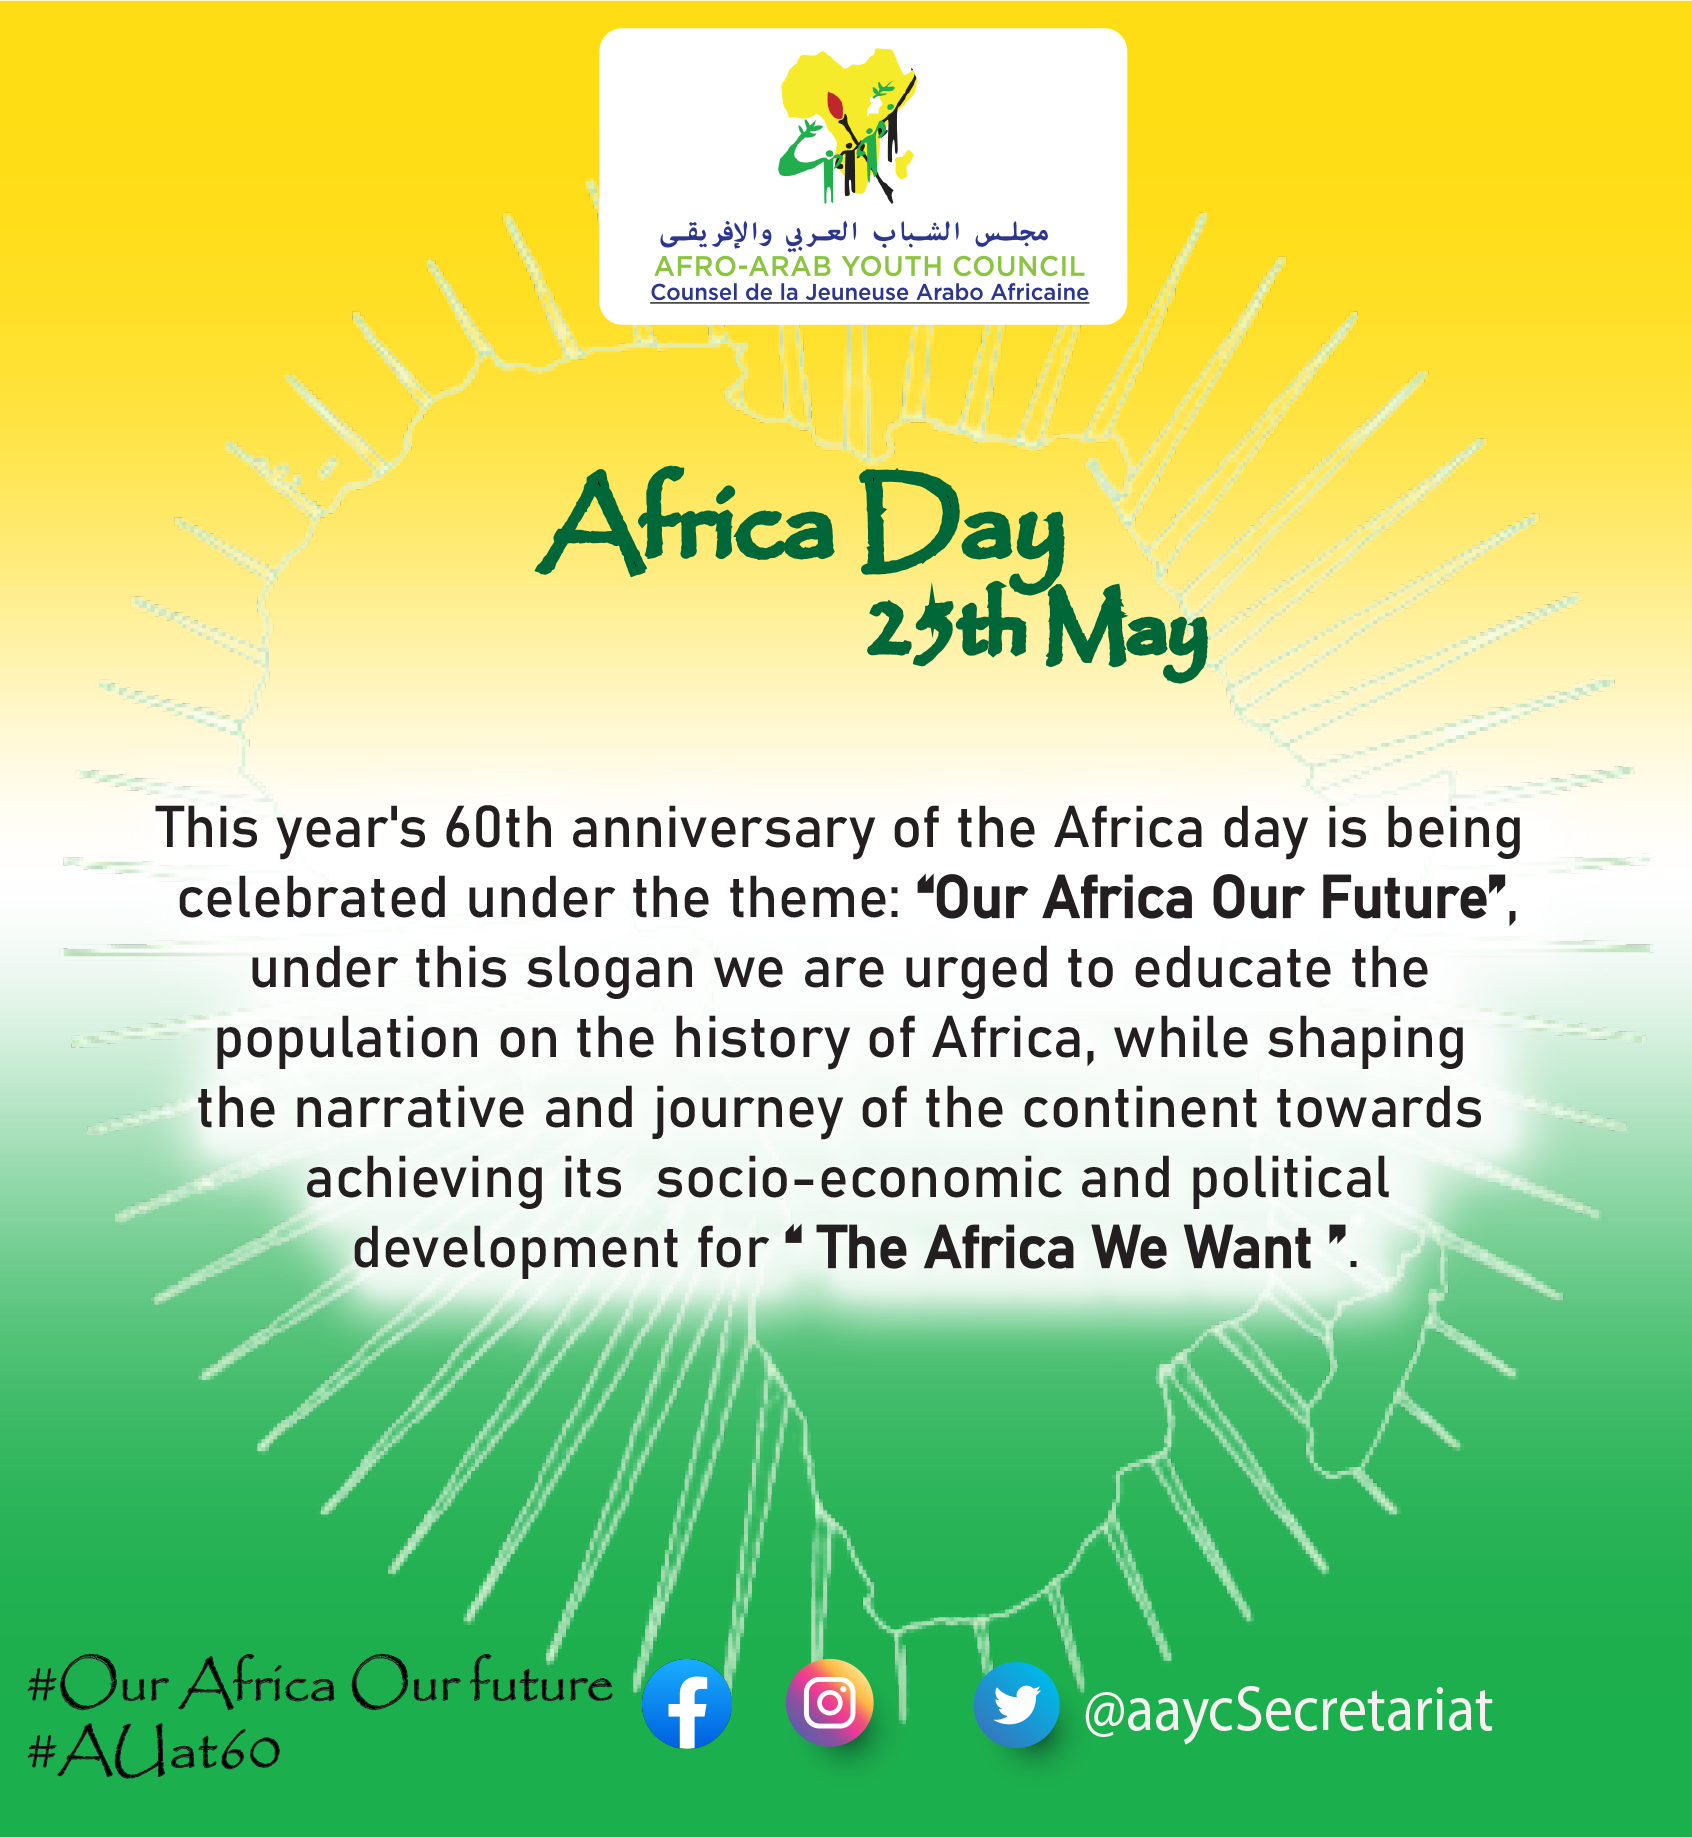 AFRO-ARAB YOUTH COUNCIL COMMEMORATES THE AFRICAN DAY - Afro Arab Youth ...